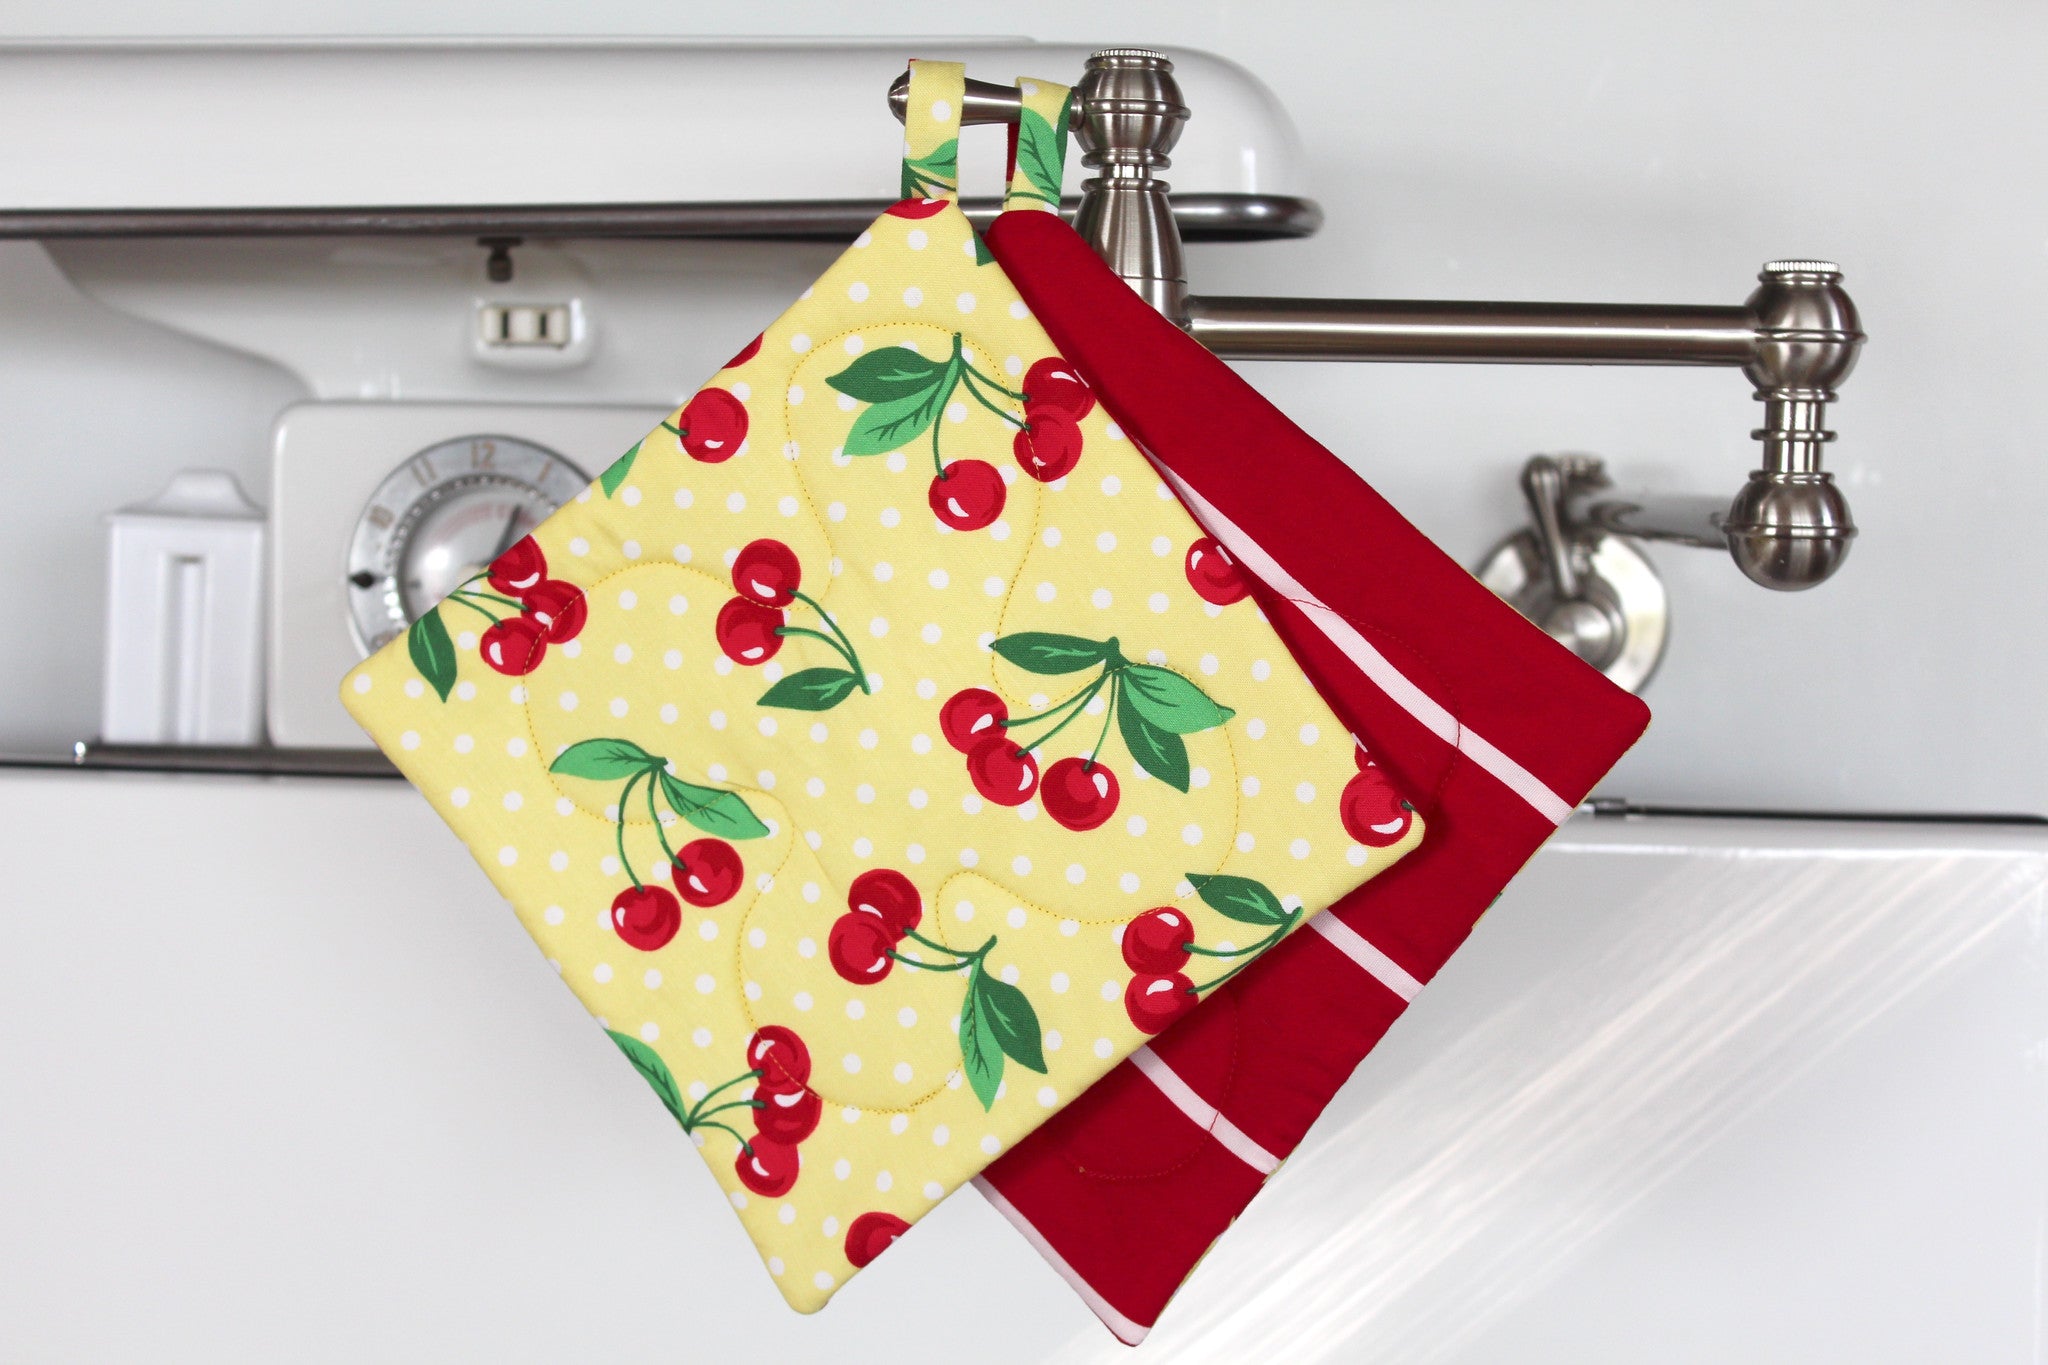 Cherry Dot Potholder - Yellow-The Blue Peony-Category_Pot Holder,Color_Red,Color_Yellow,Department_Kitchen,Pattern_Stripes,Size_Traditional (Square),Theme_Food